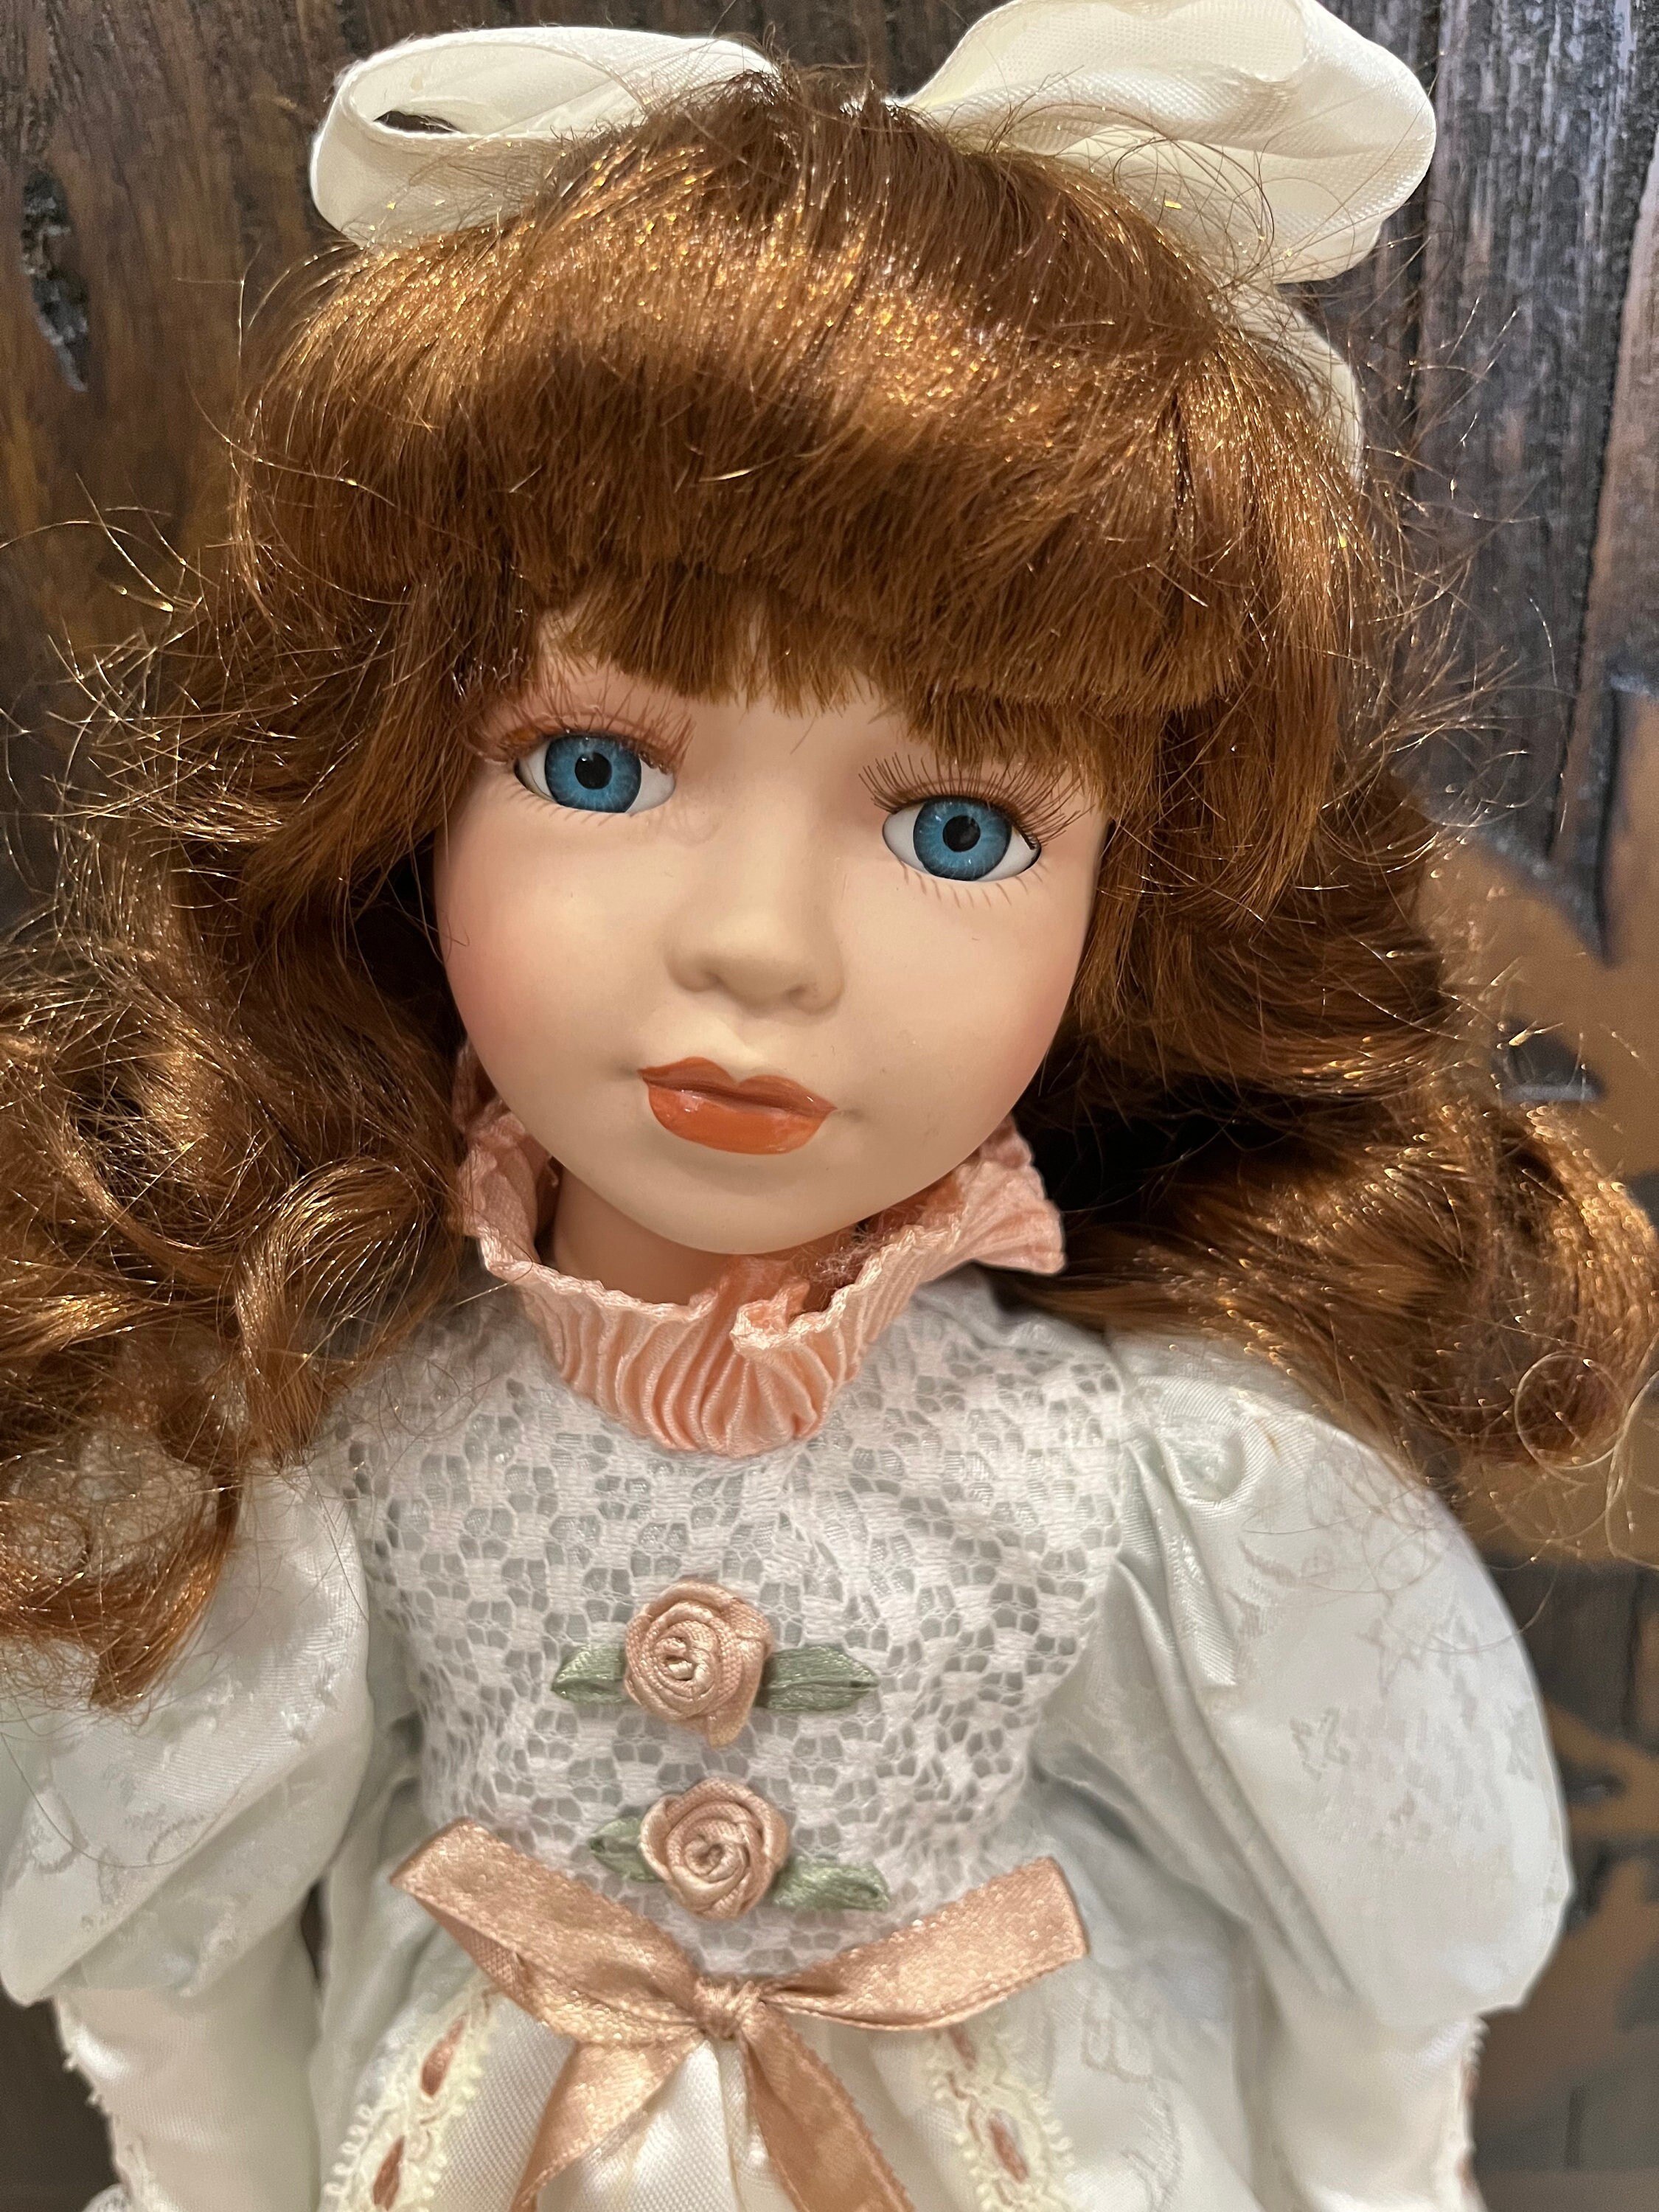 Haunted Doll Positivejossie-9 Years Old Little - Etsy